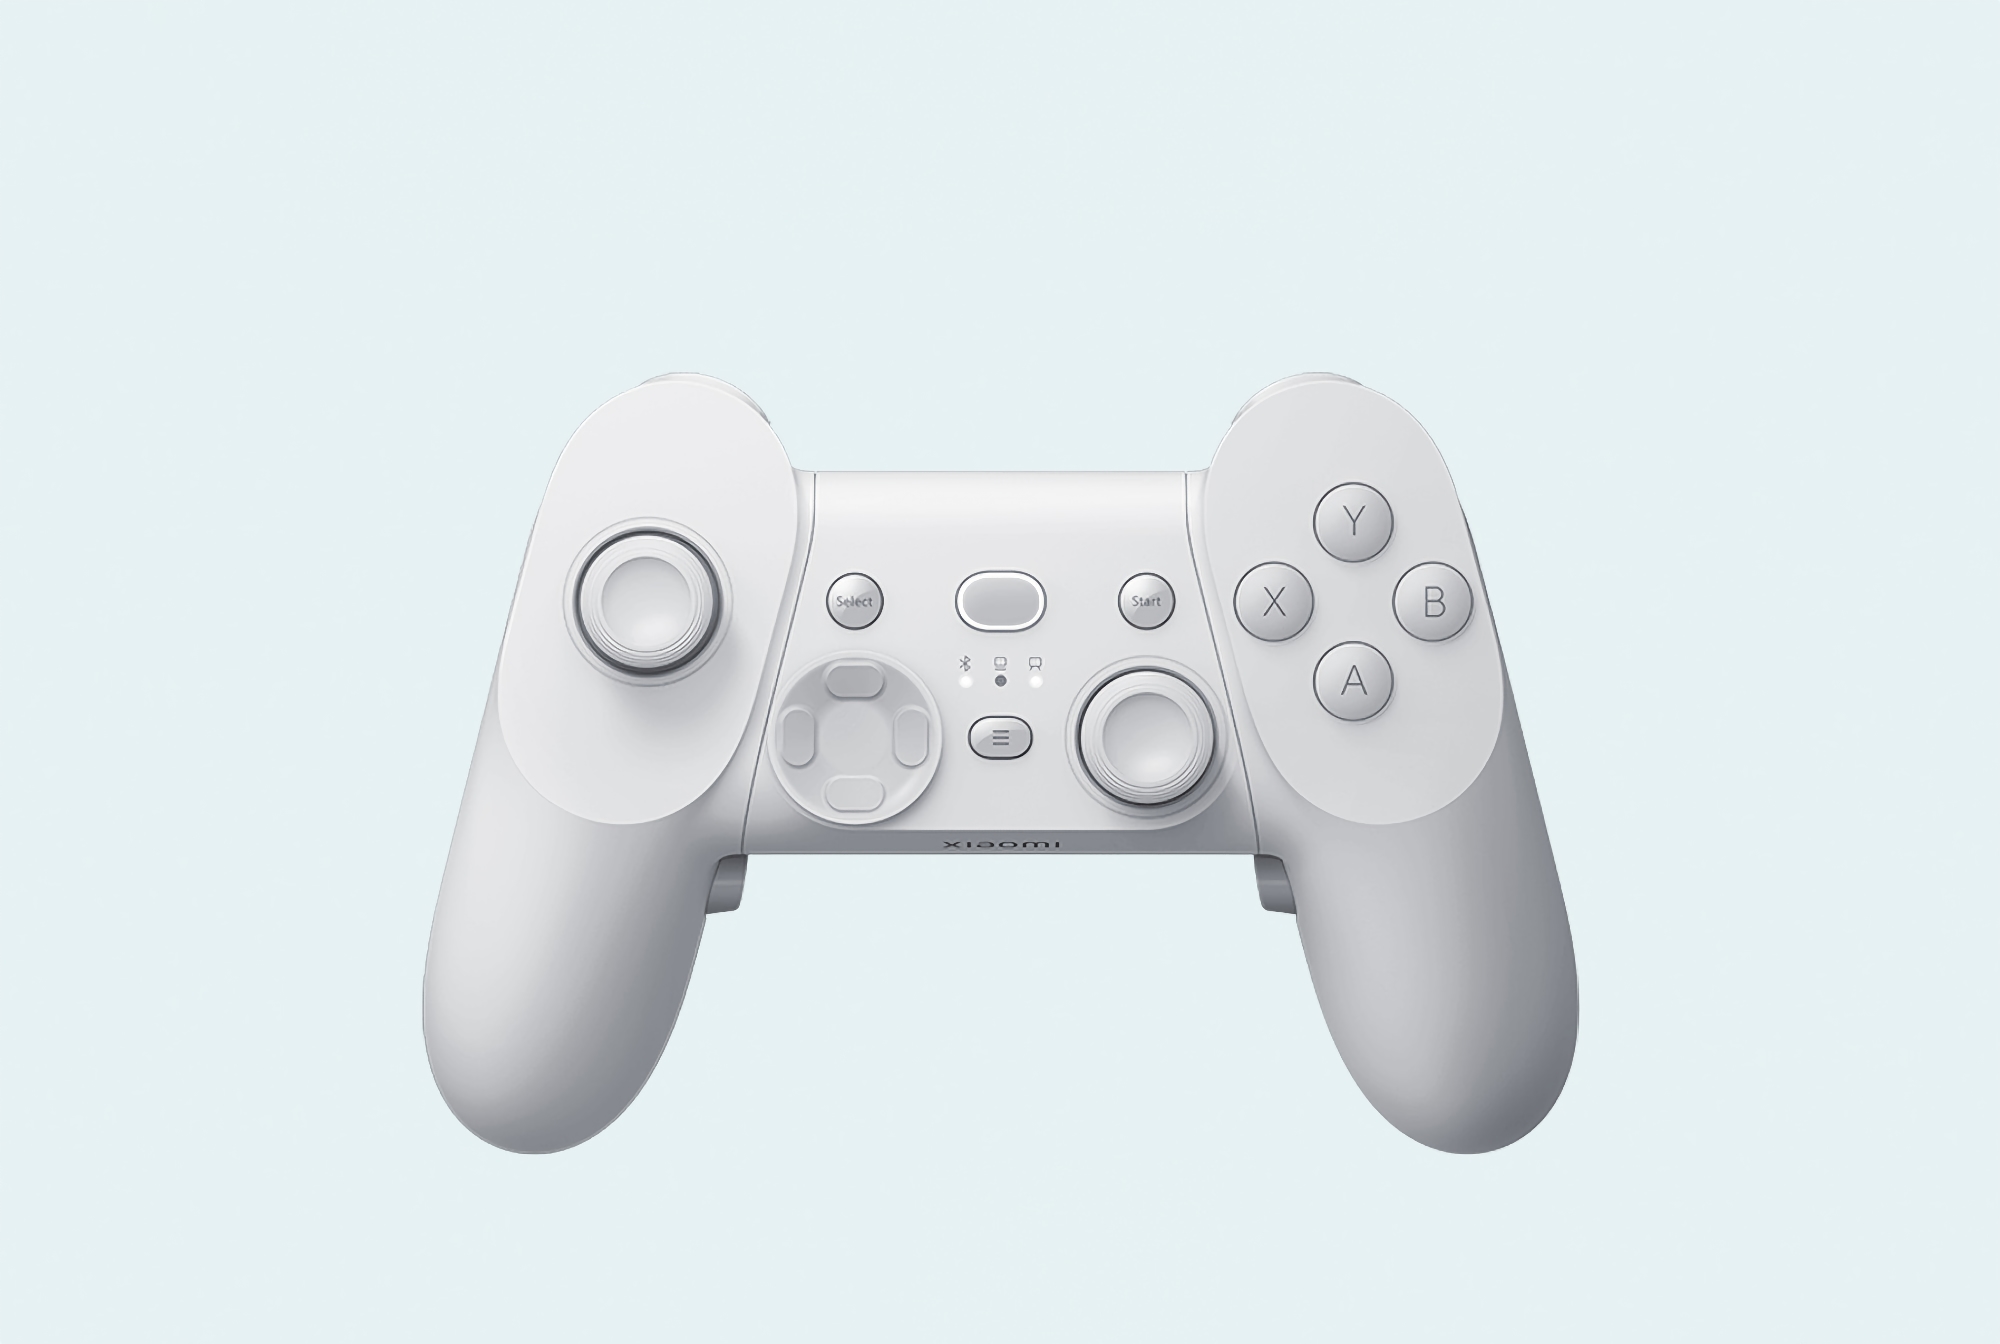 Xiaomi introduced the GamePad Elite Edition game controller with Steam support for $60